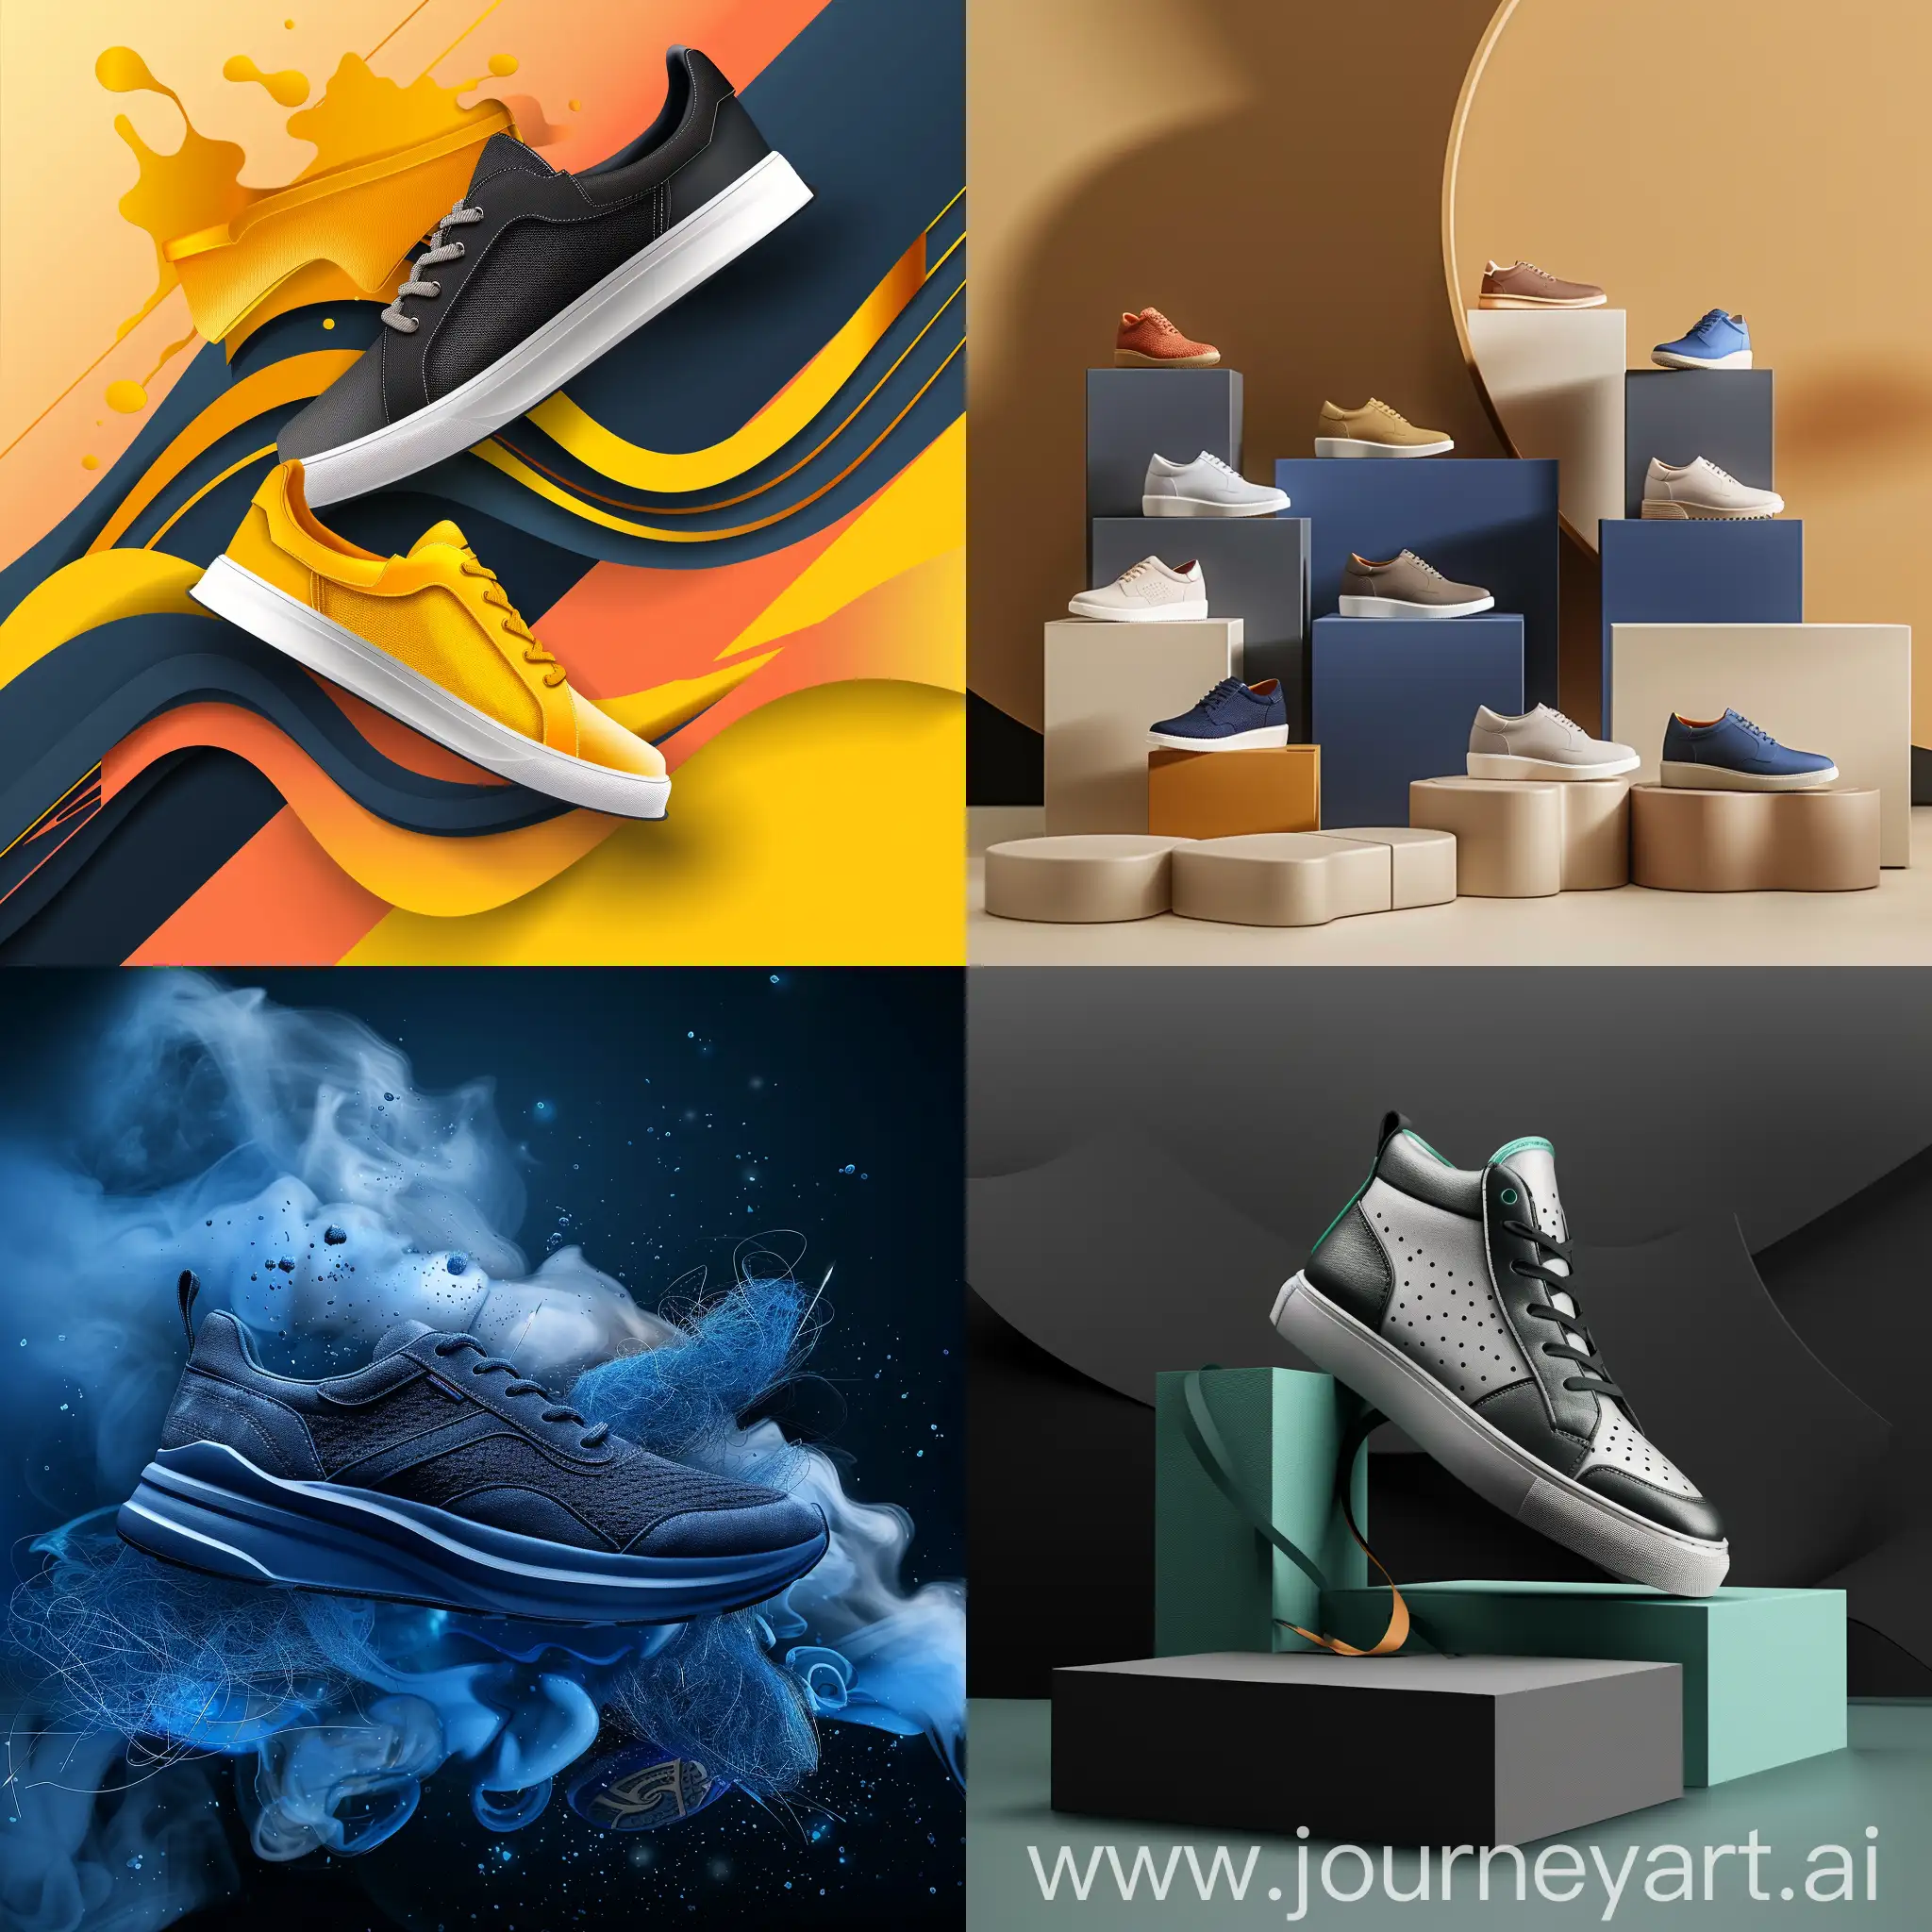 ad creative for shoes store professional design